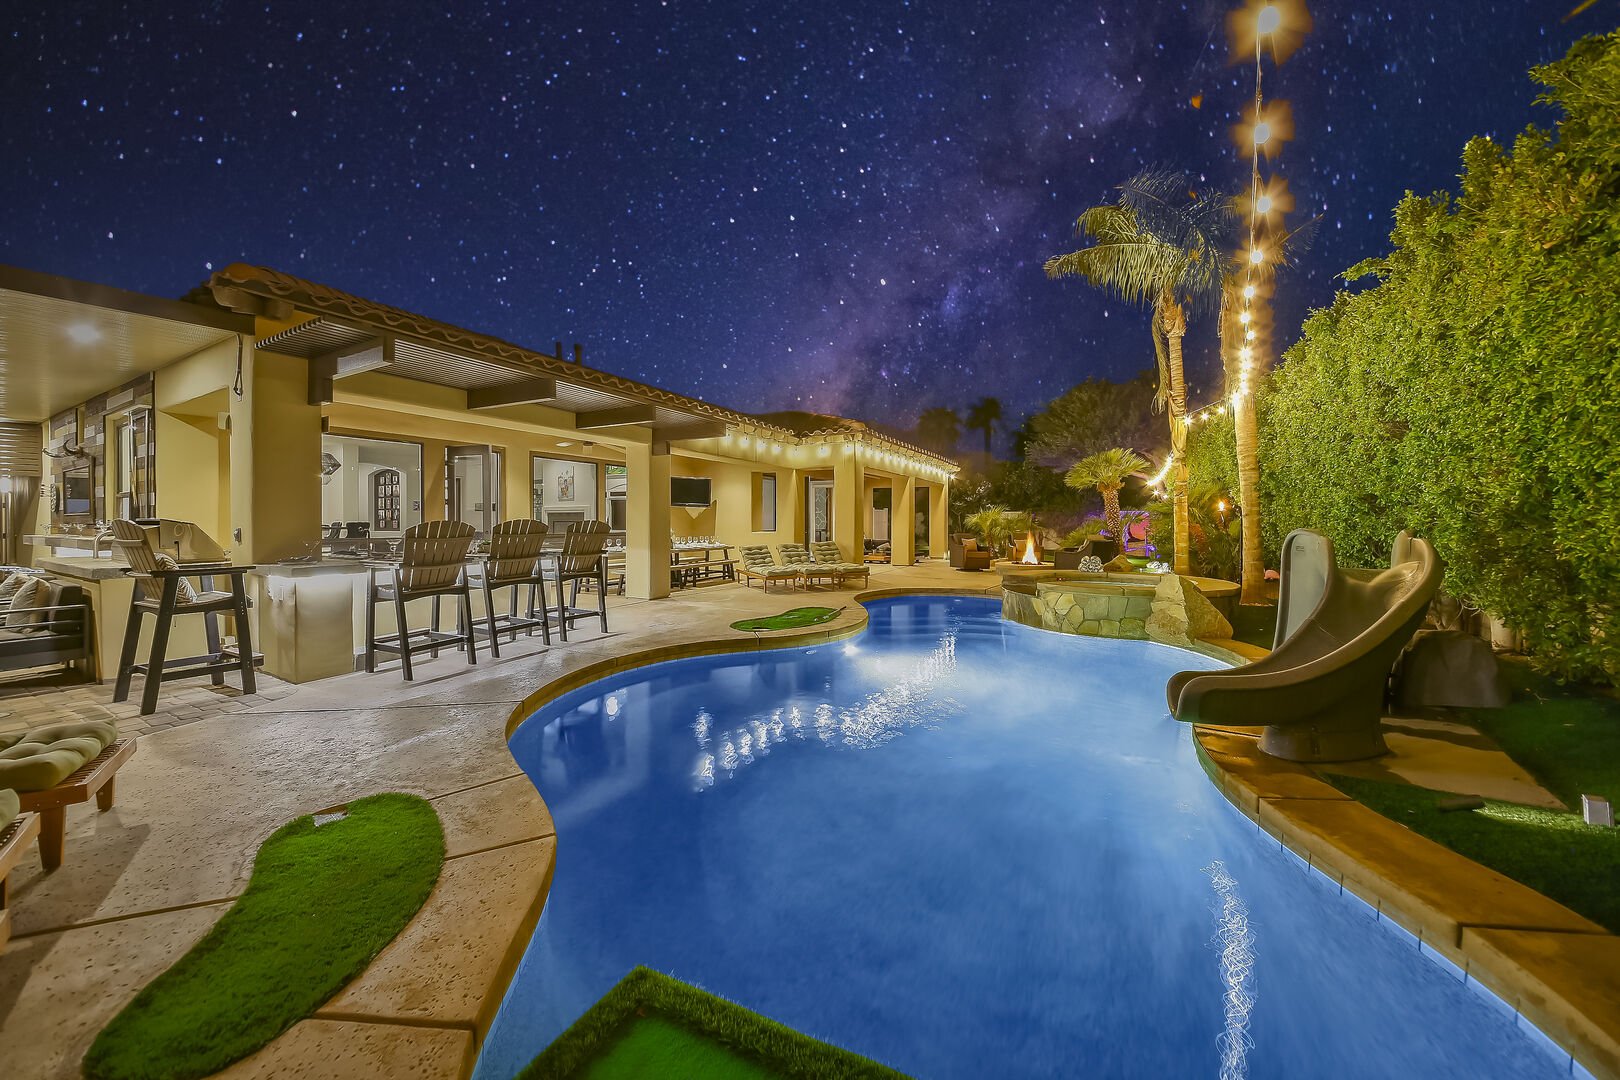 Hollywood will exceed your expectations when it comes to outdoor entertaining. With a pool, spa, games, and much more!